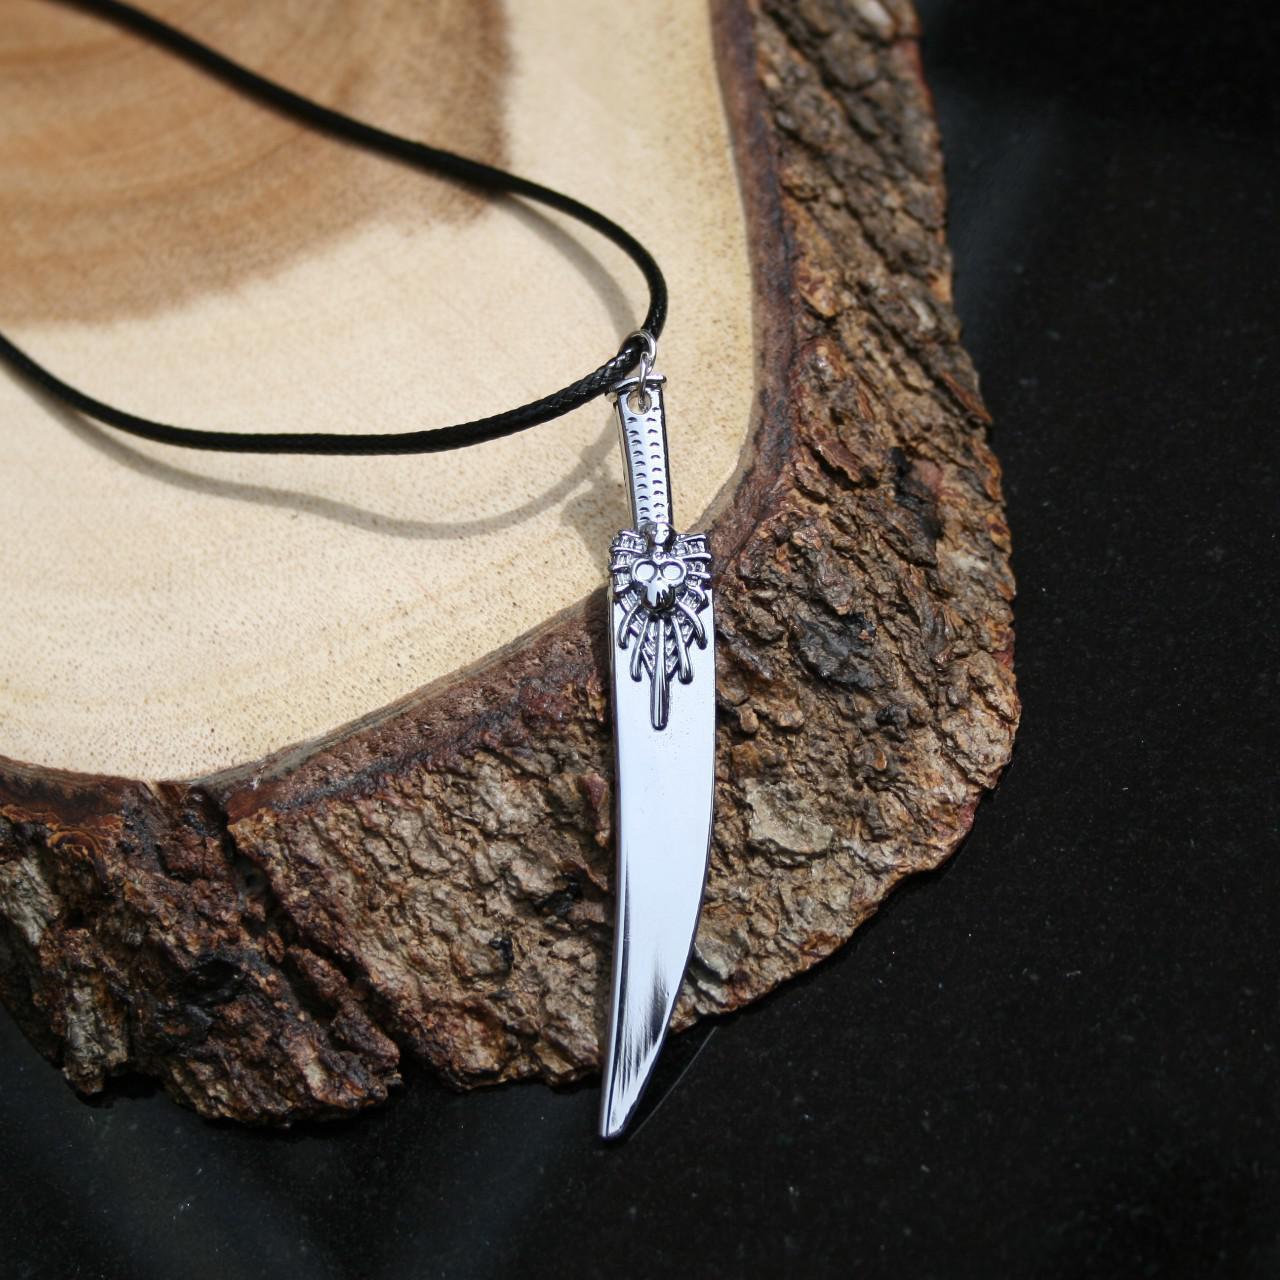 Product Image 2 - Fantasy swords from the iconic